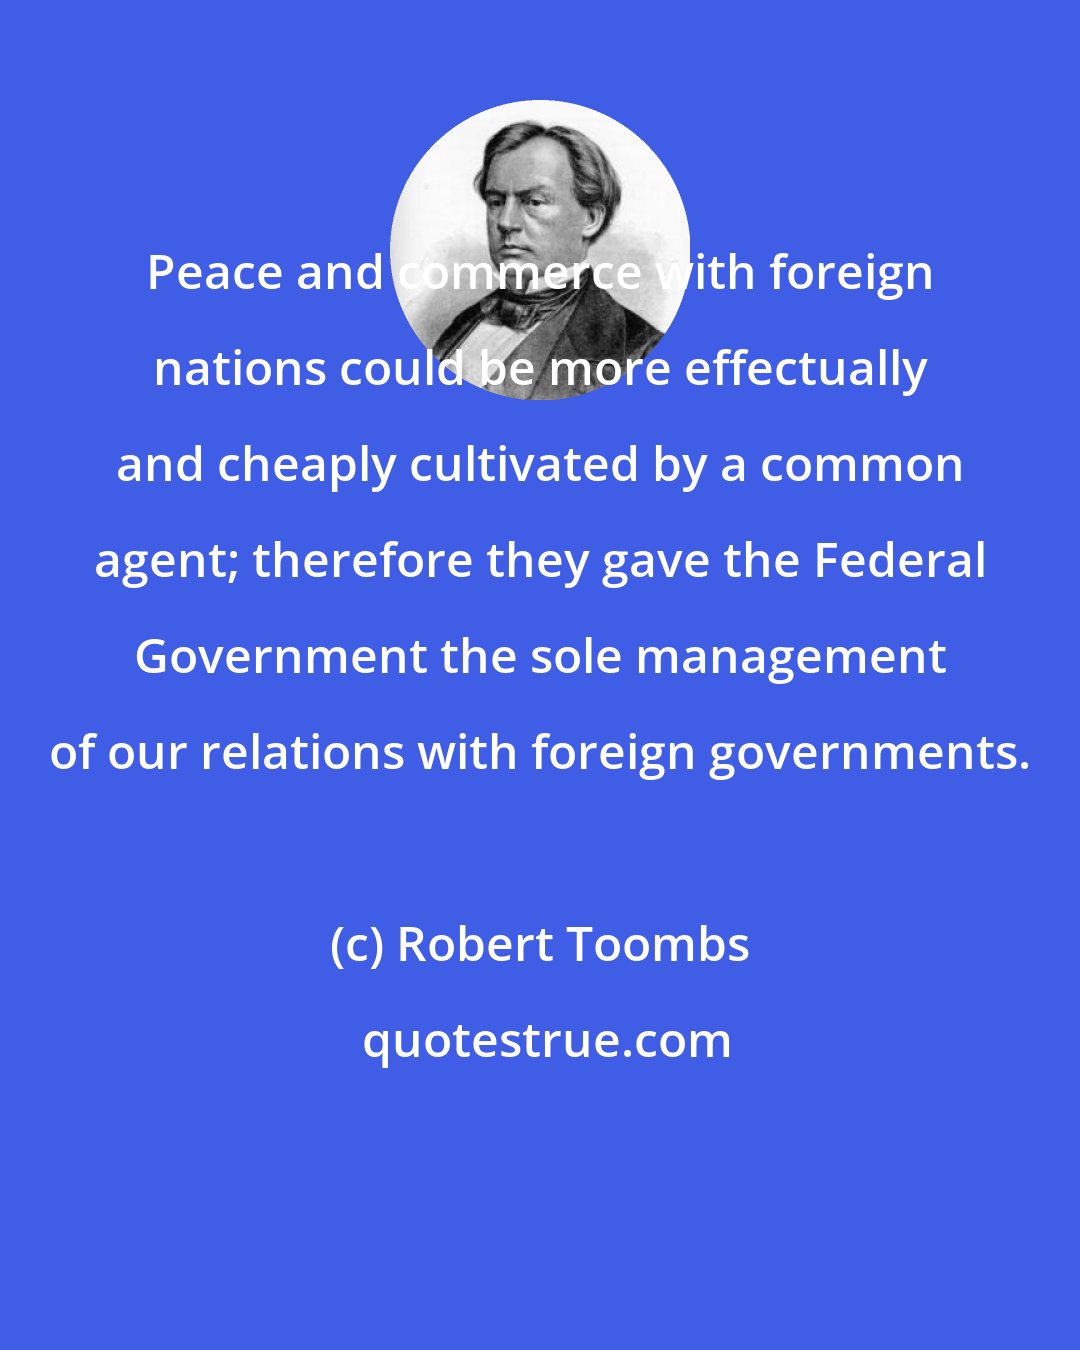 Robert Toombs: Peace and commerce with foreign nations could be more effectually and cheaply cultivated by a common agent; therefore they gave the Federal Government the sole management of our relations with foreign governments.